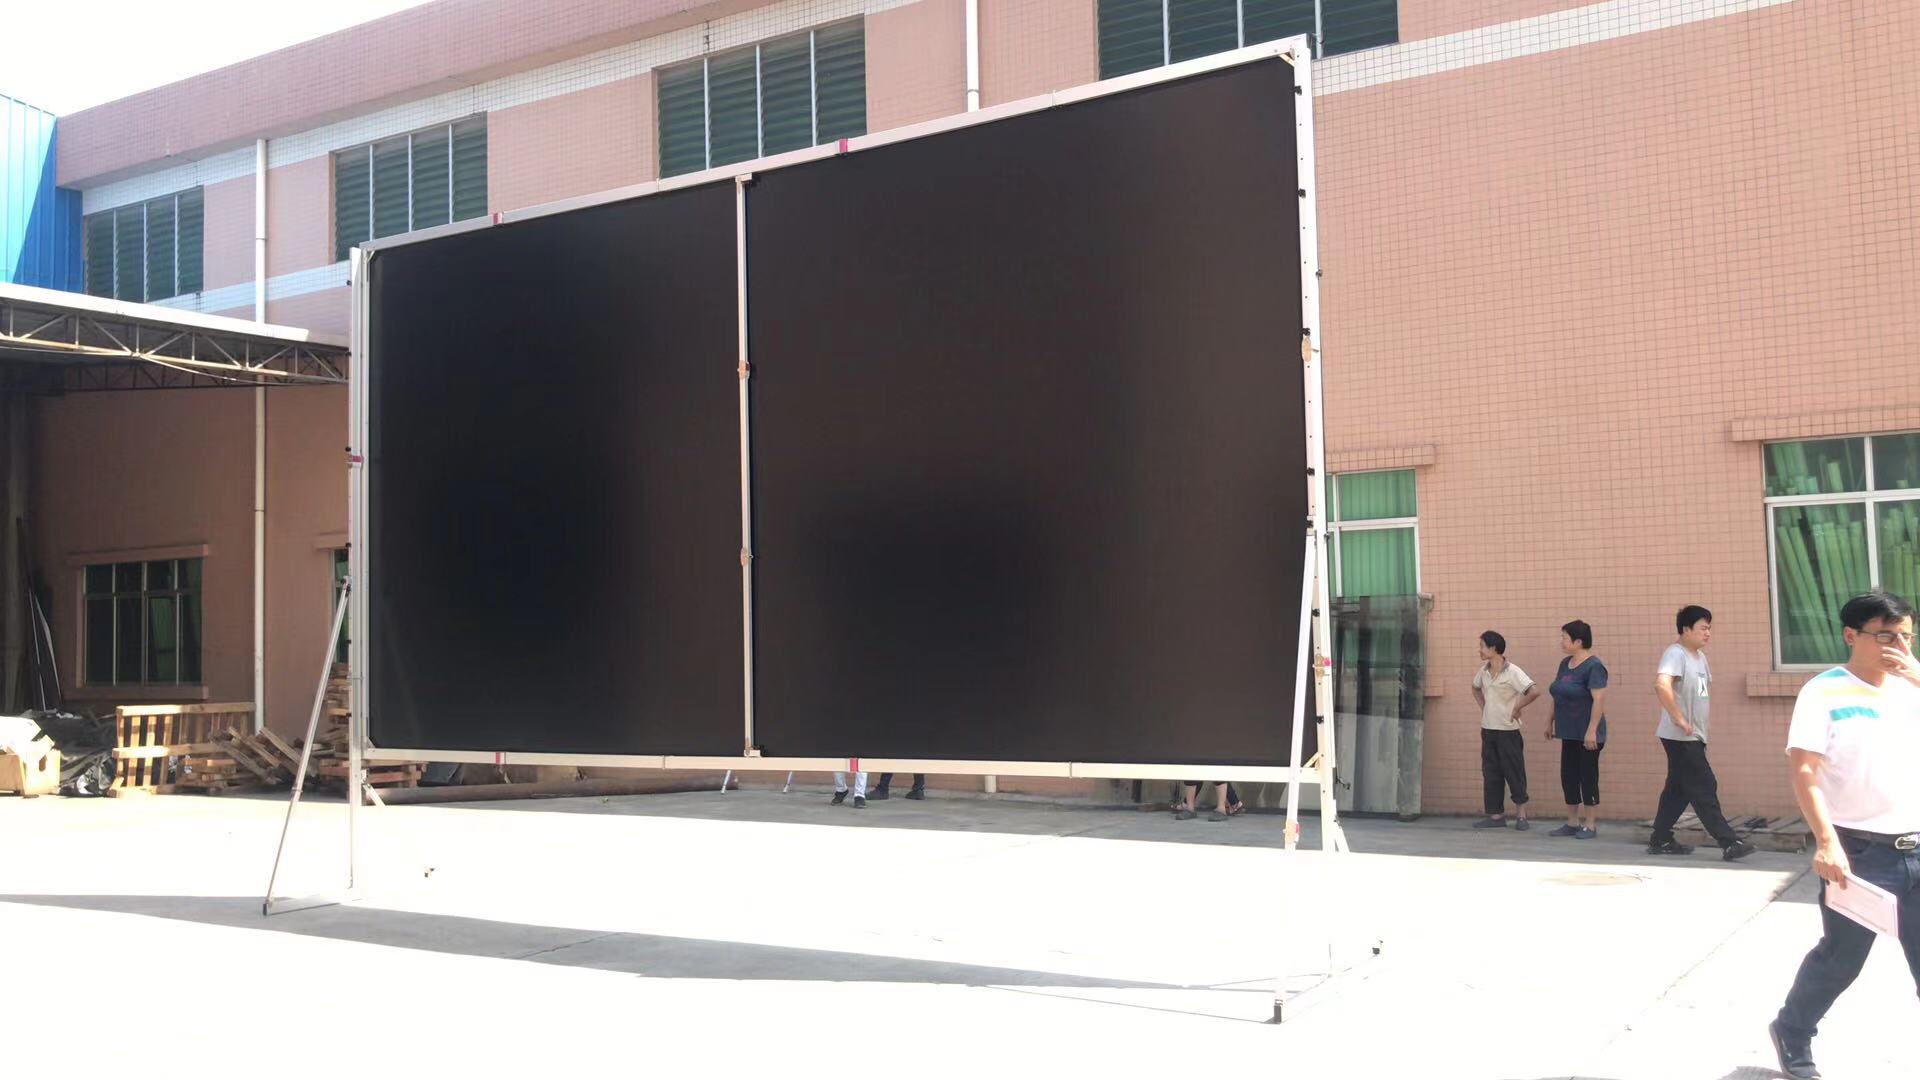 350'' Movie Screen fast fold projection screen front projection rear projection screen with drape kits 